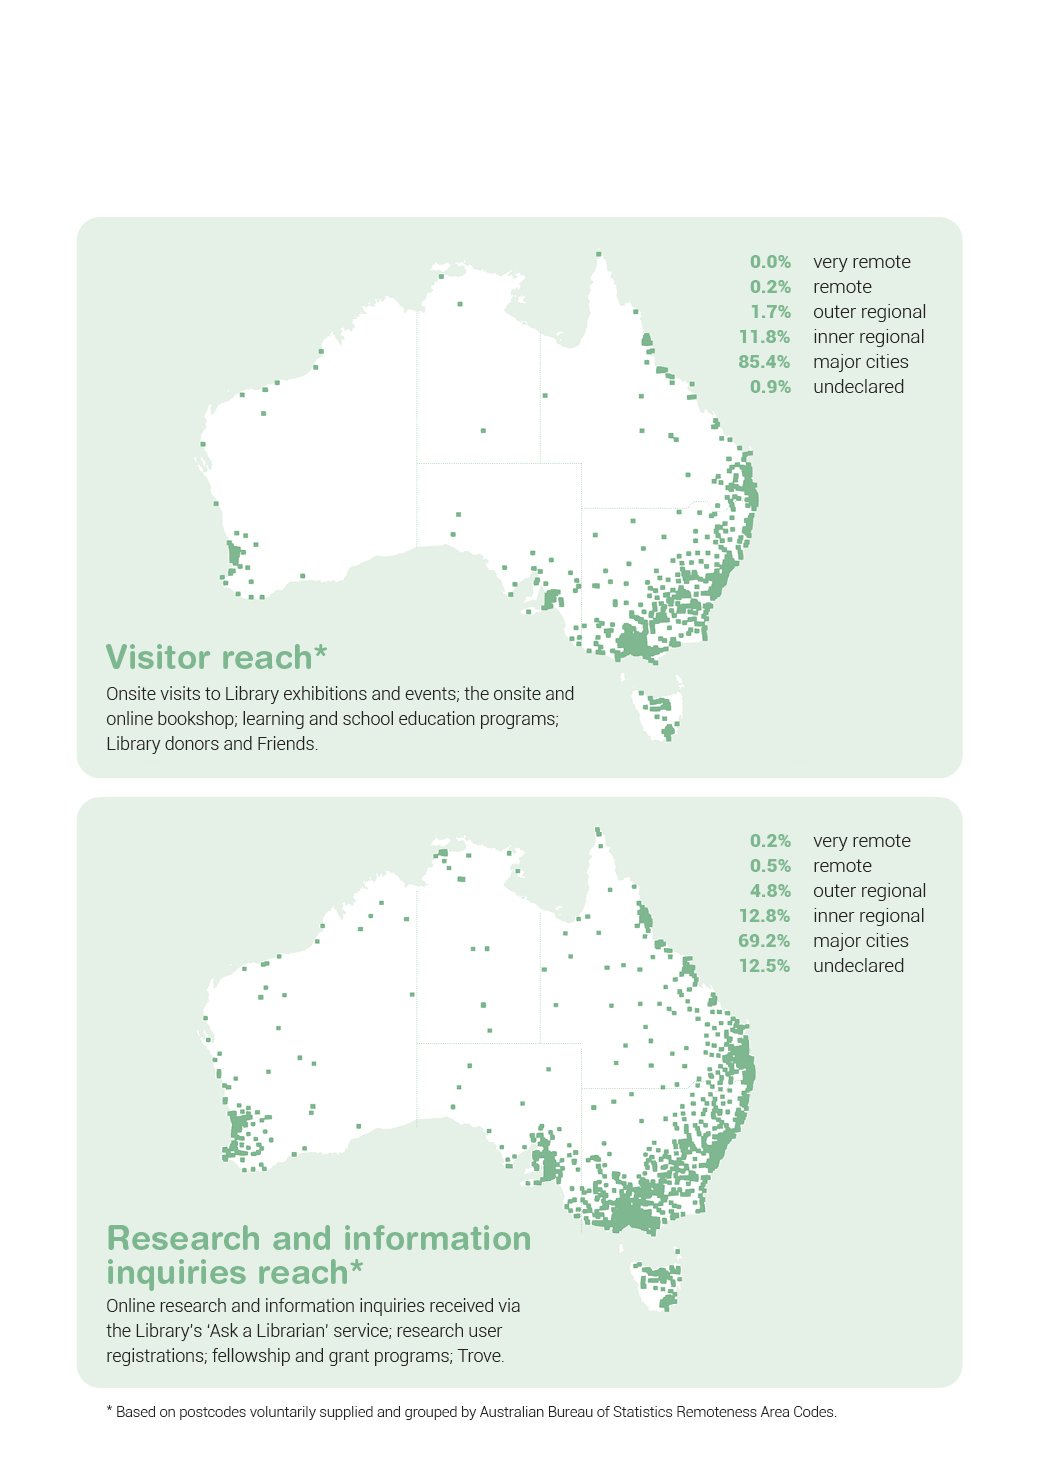 Two maps of Australia showing distribution of visitor reach and research and information enquiry reach. 85% of visitors come from major cities, with 11.8% from inner regional areas, 1.9% from outer regional and remote areas and 0.9% undeclared. 